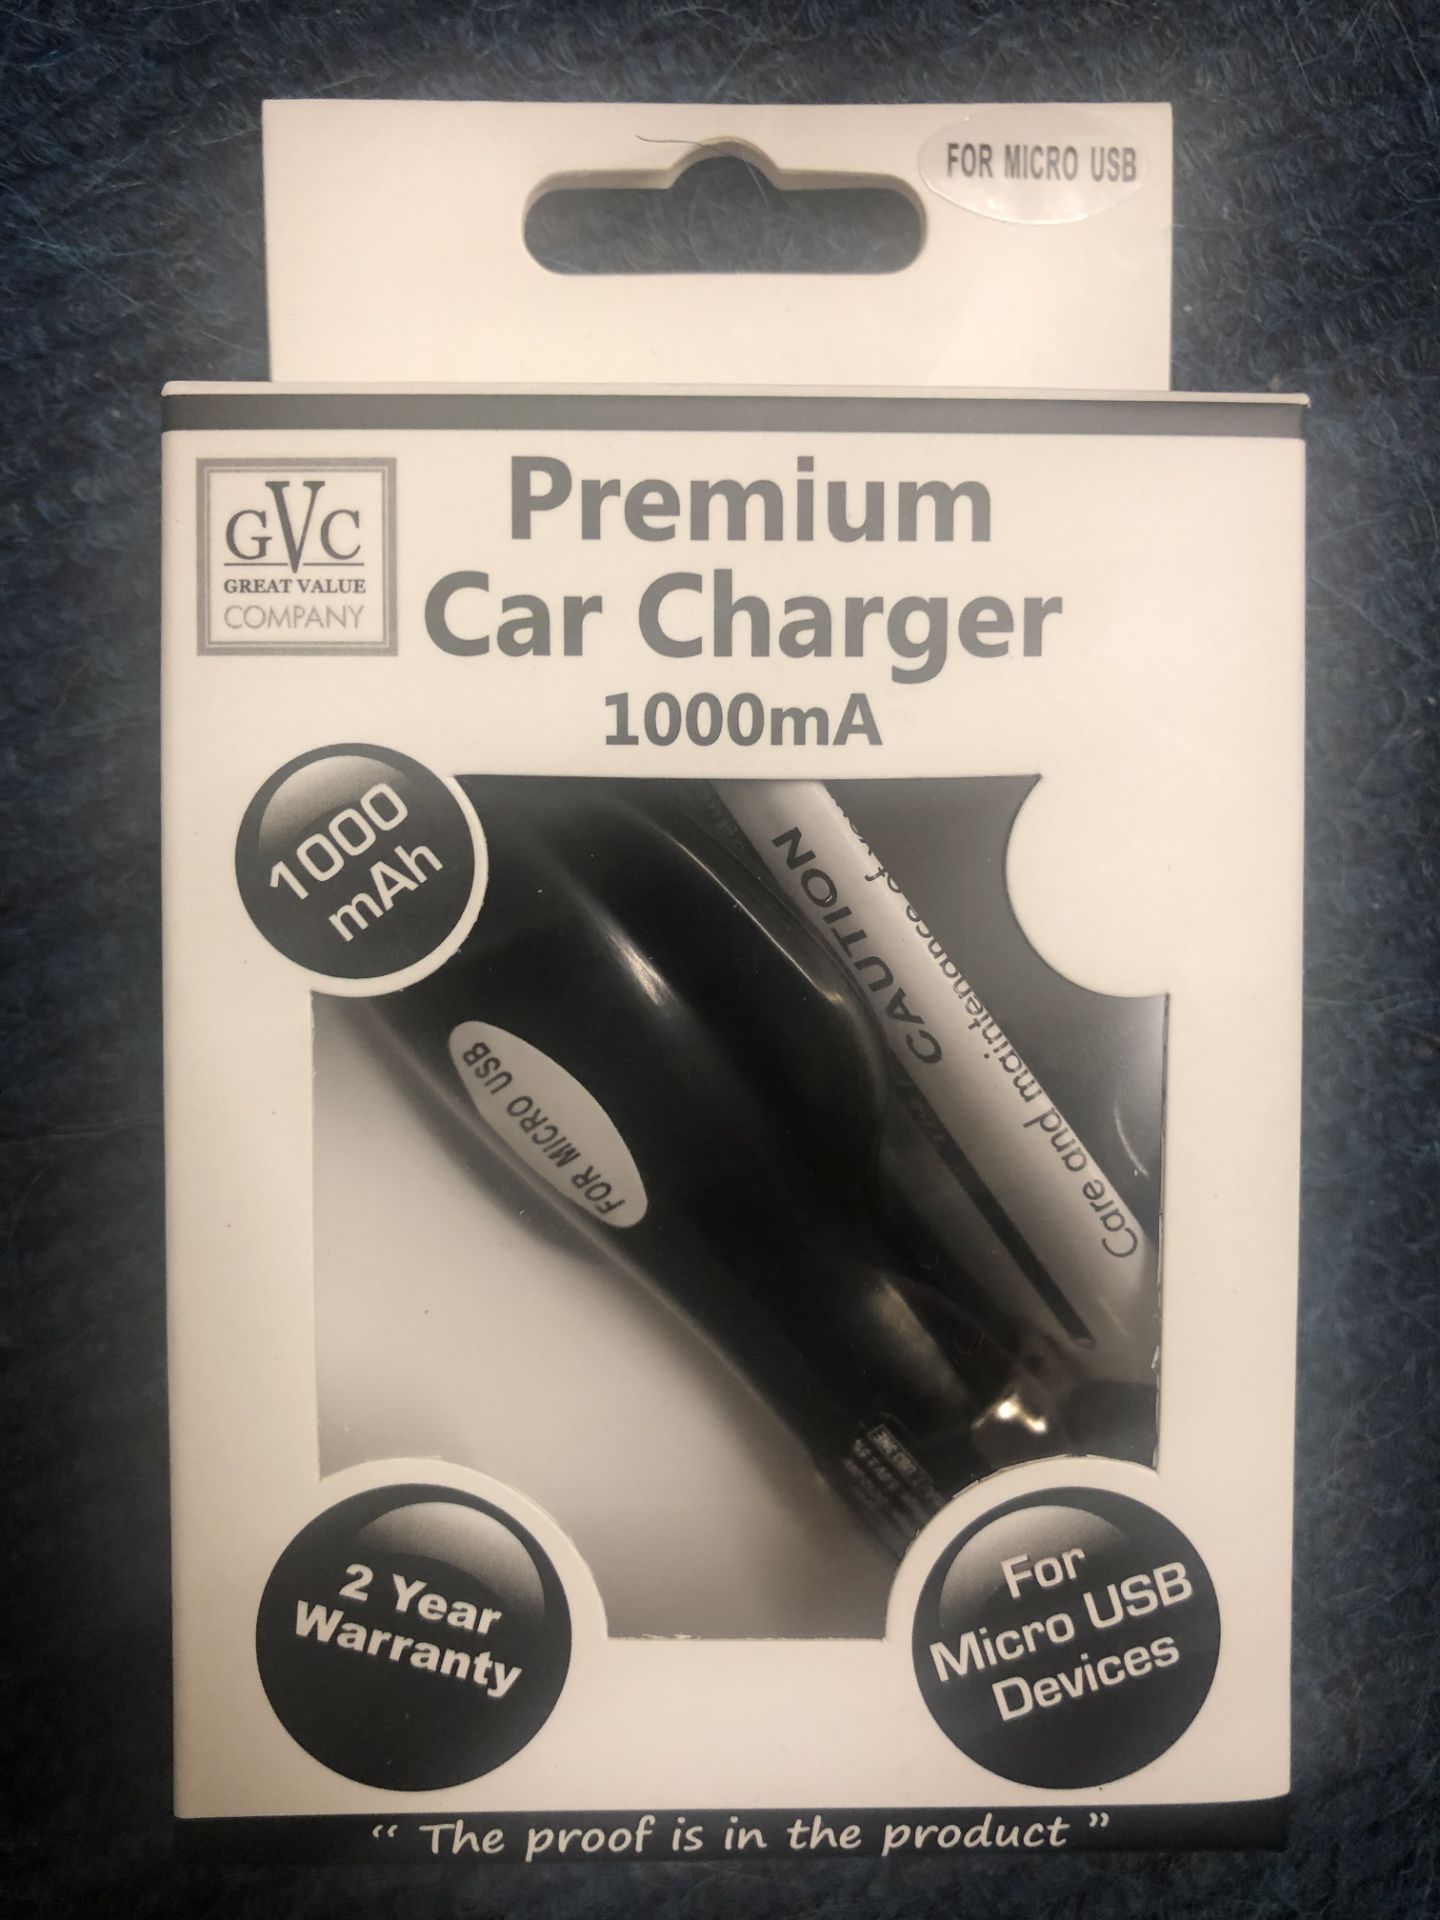 100 x GVC 1000mA Car Charger For Micro USB Devices - Black - Image 3 of 4